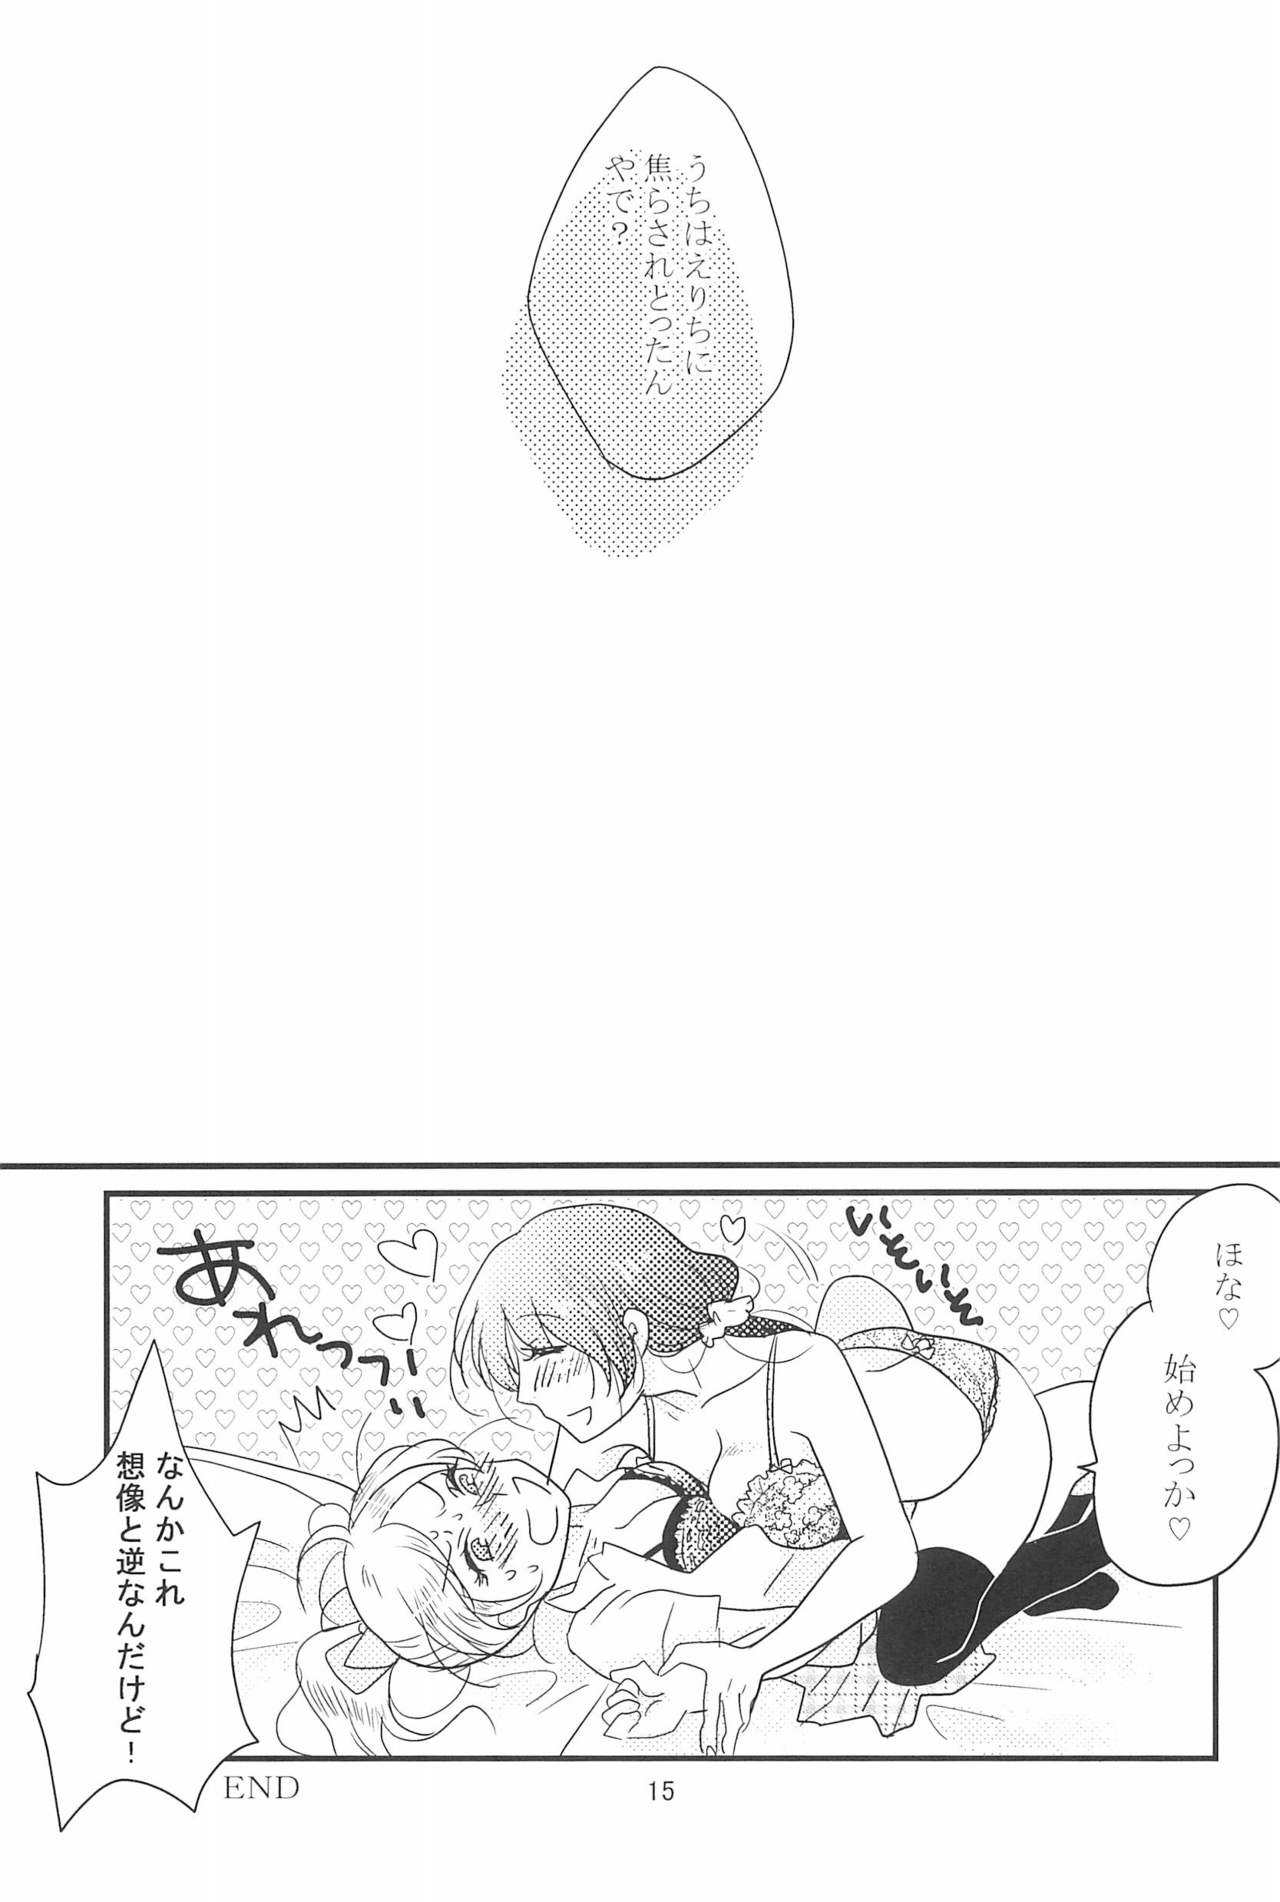 (C90) [BK*N2 (Mikawa Miso)] HAPPY GO LUCKY DAYS (Love Live!) page 19 full